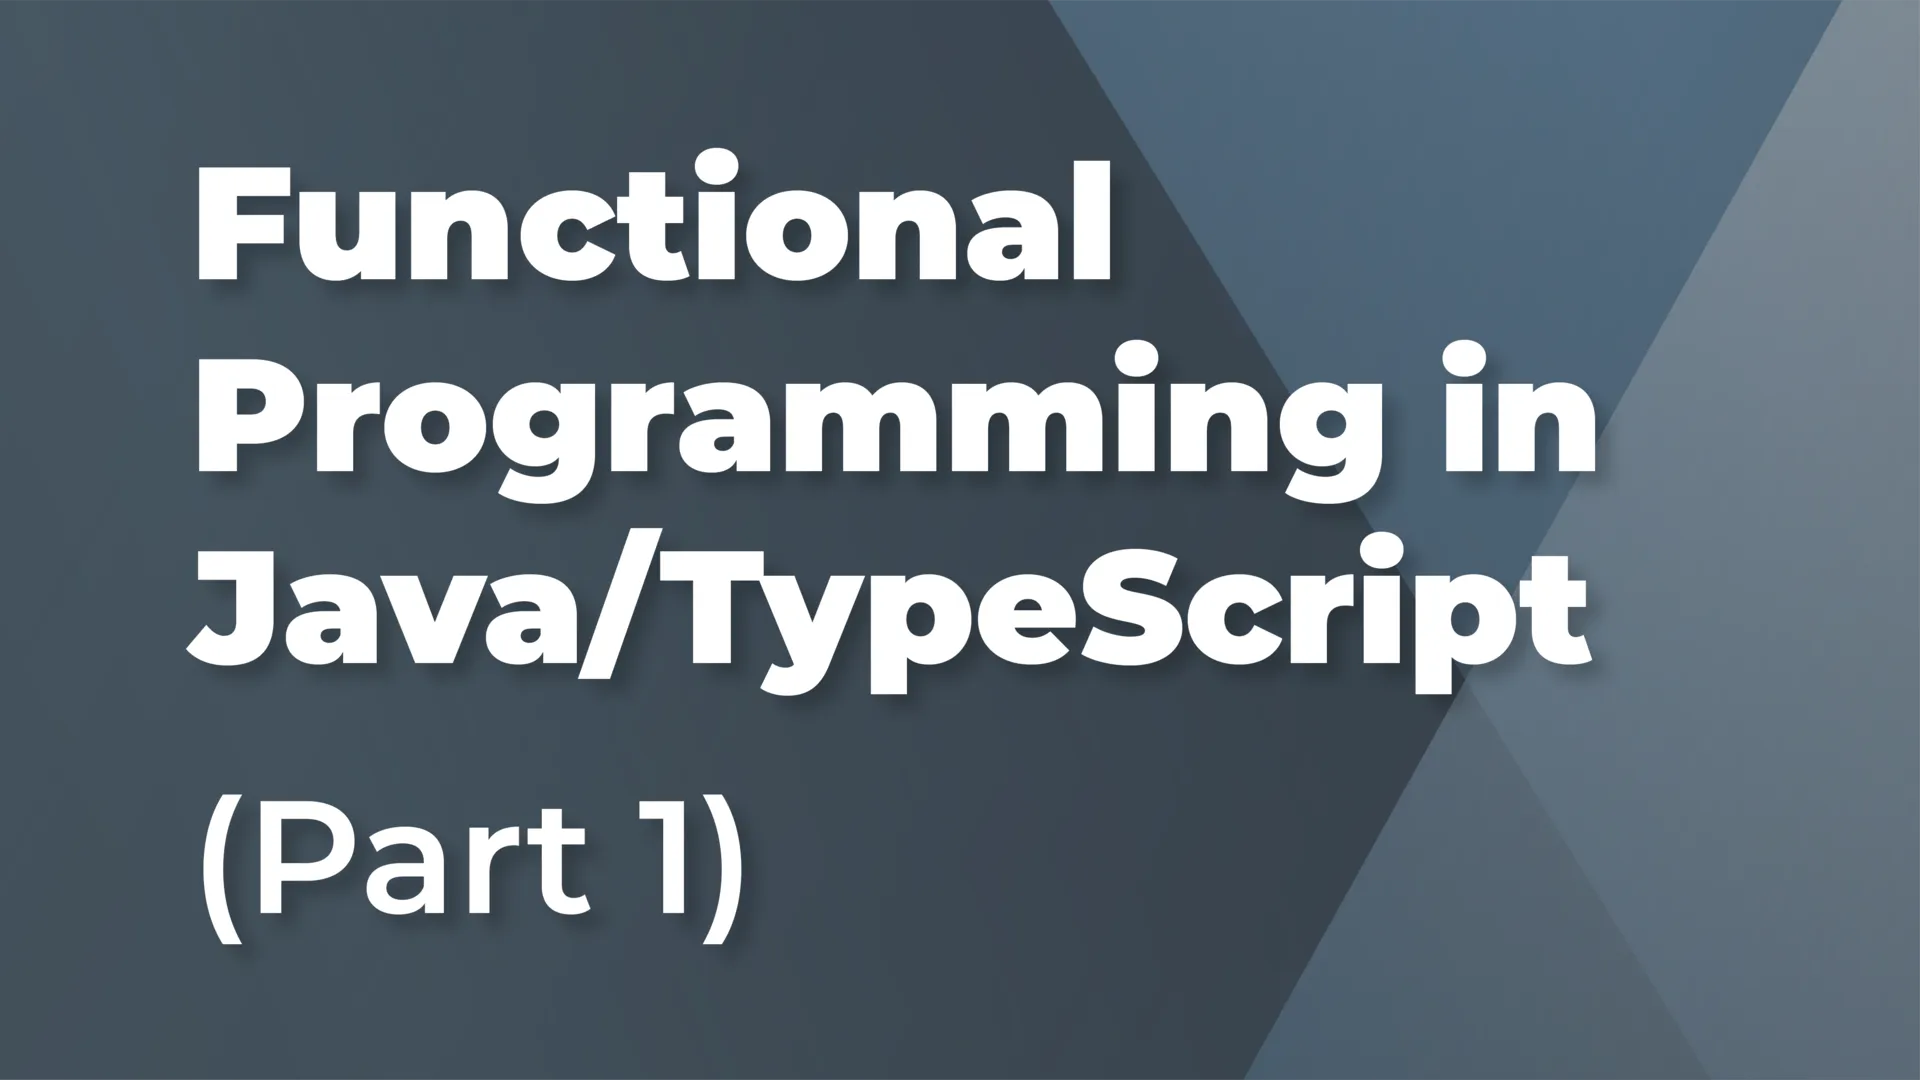 Foundations of Functional Programming in Java/TypeScript (Part 1)